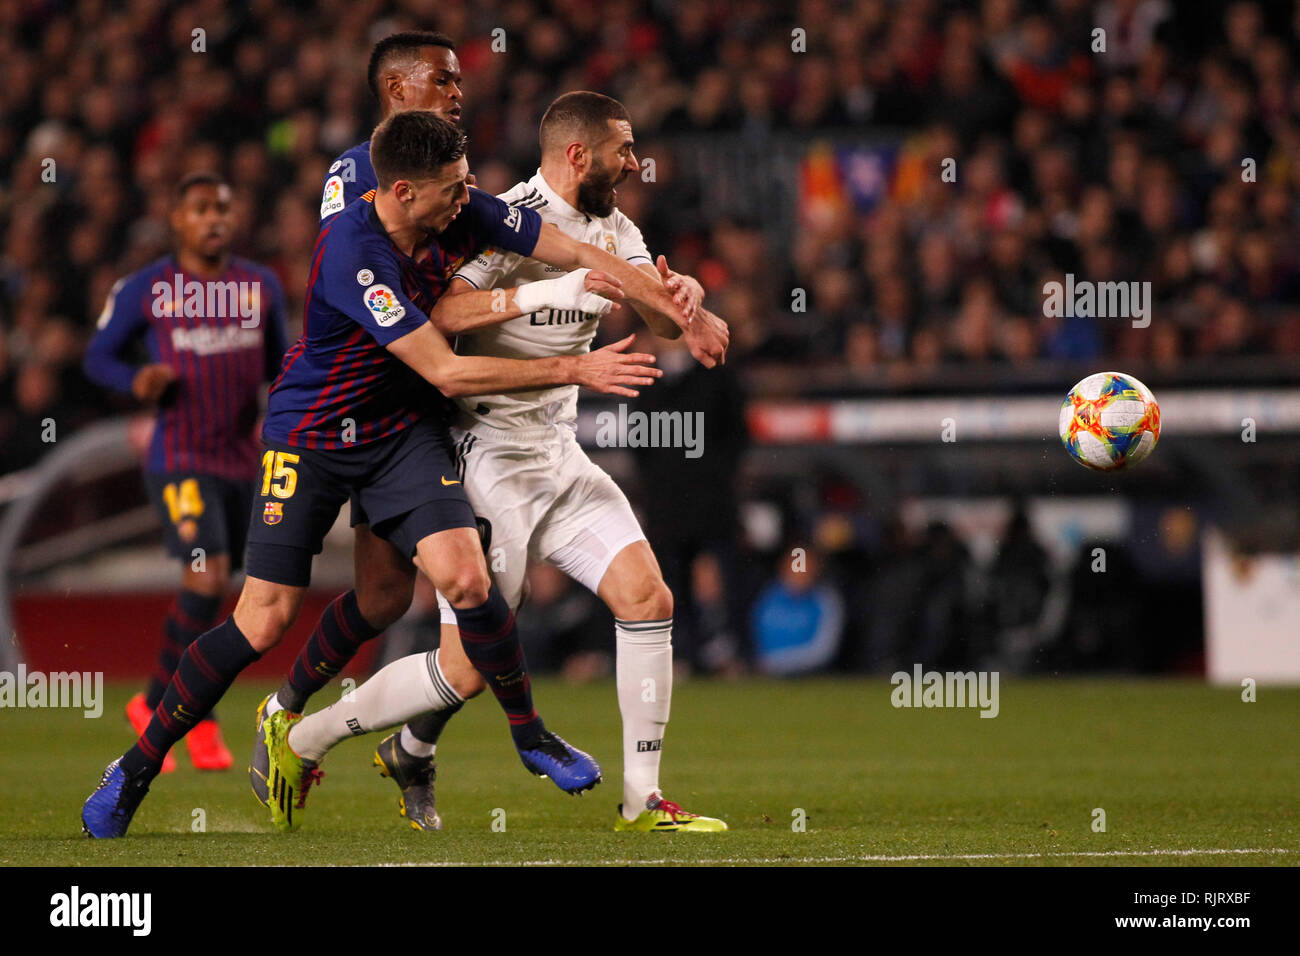 Spain La Copa, Semi finals, First Leg, FC Barcelona vs. Real Madrid, reporting live during the game -- Karim Benzema, French striker for Real Madrid fights for a ball with the opposition of Vermaelen, Belgian defender for FC Barcelona and Semedo, Portuguese defender for FC Barcelona Stock Photo